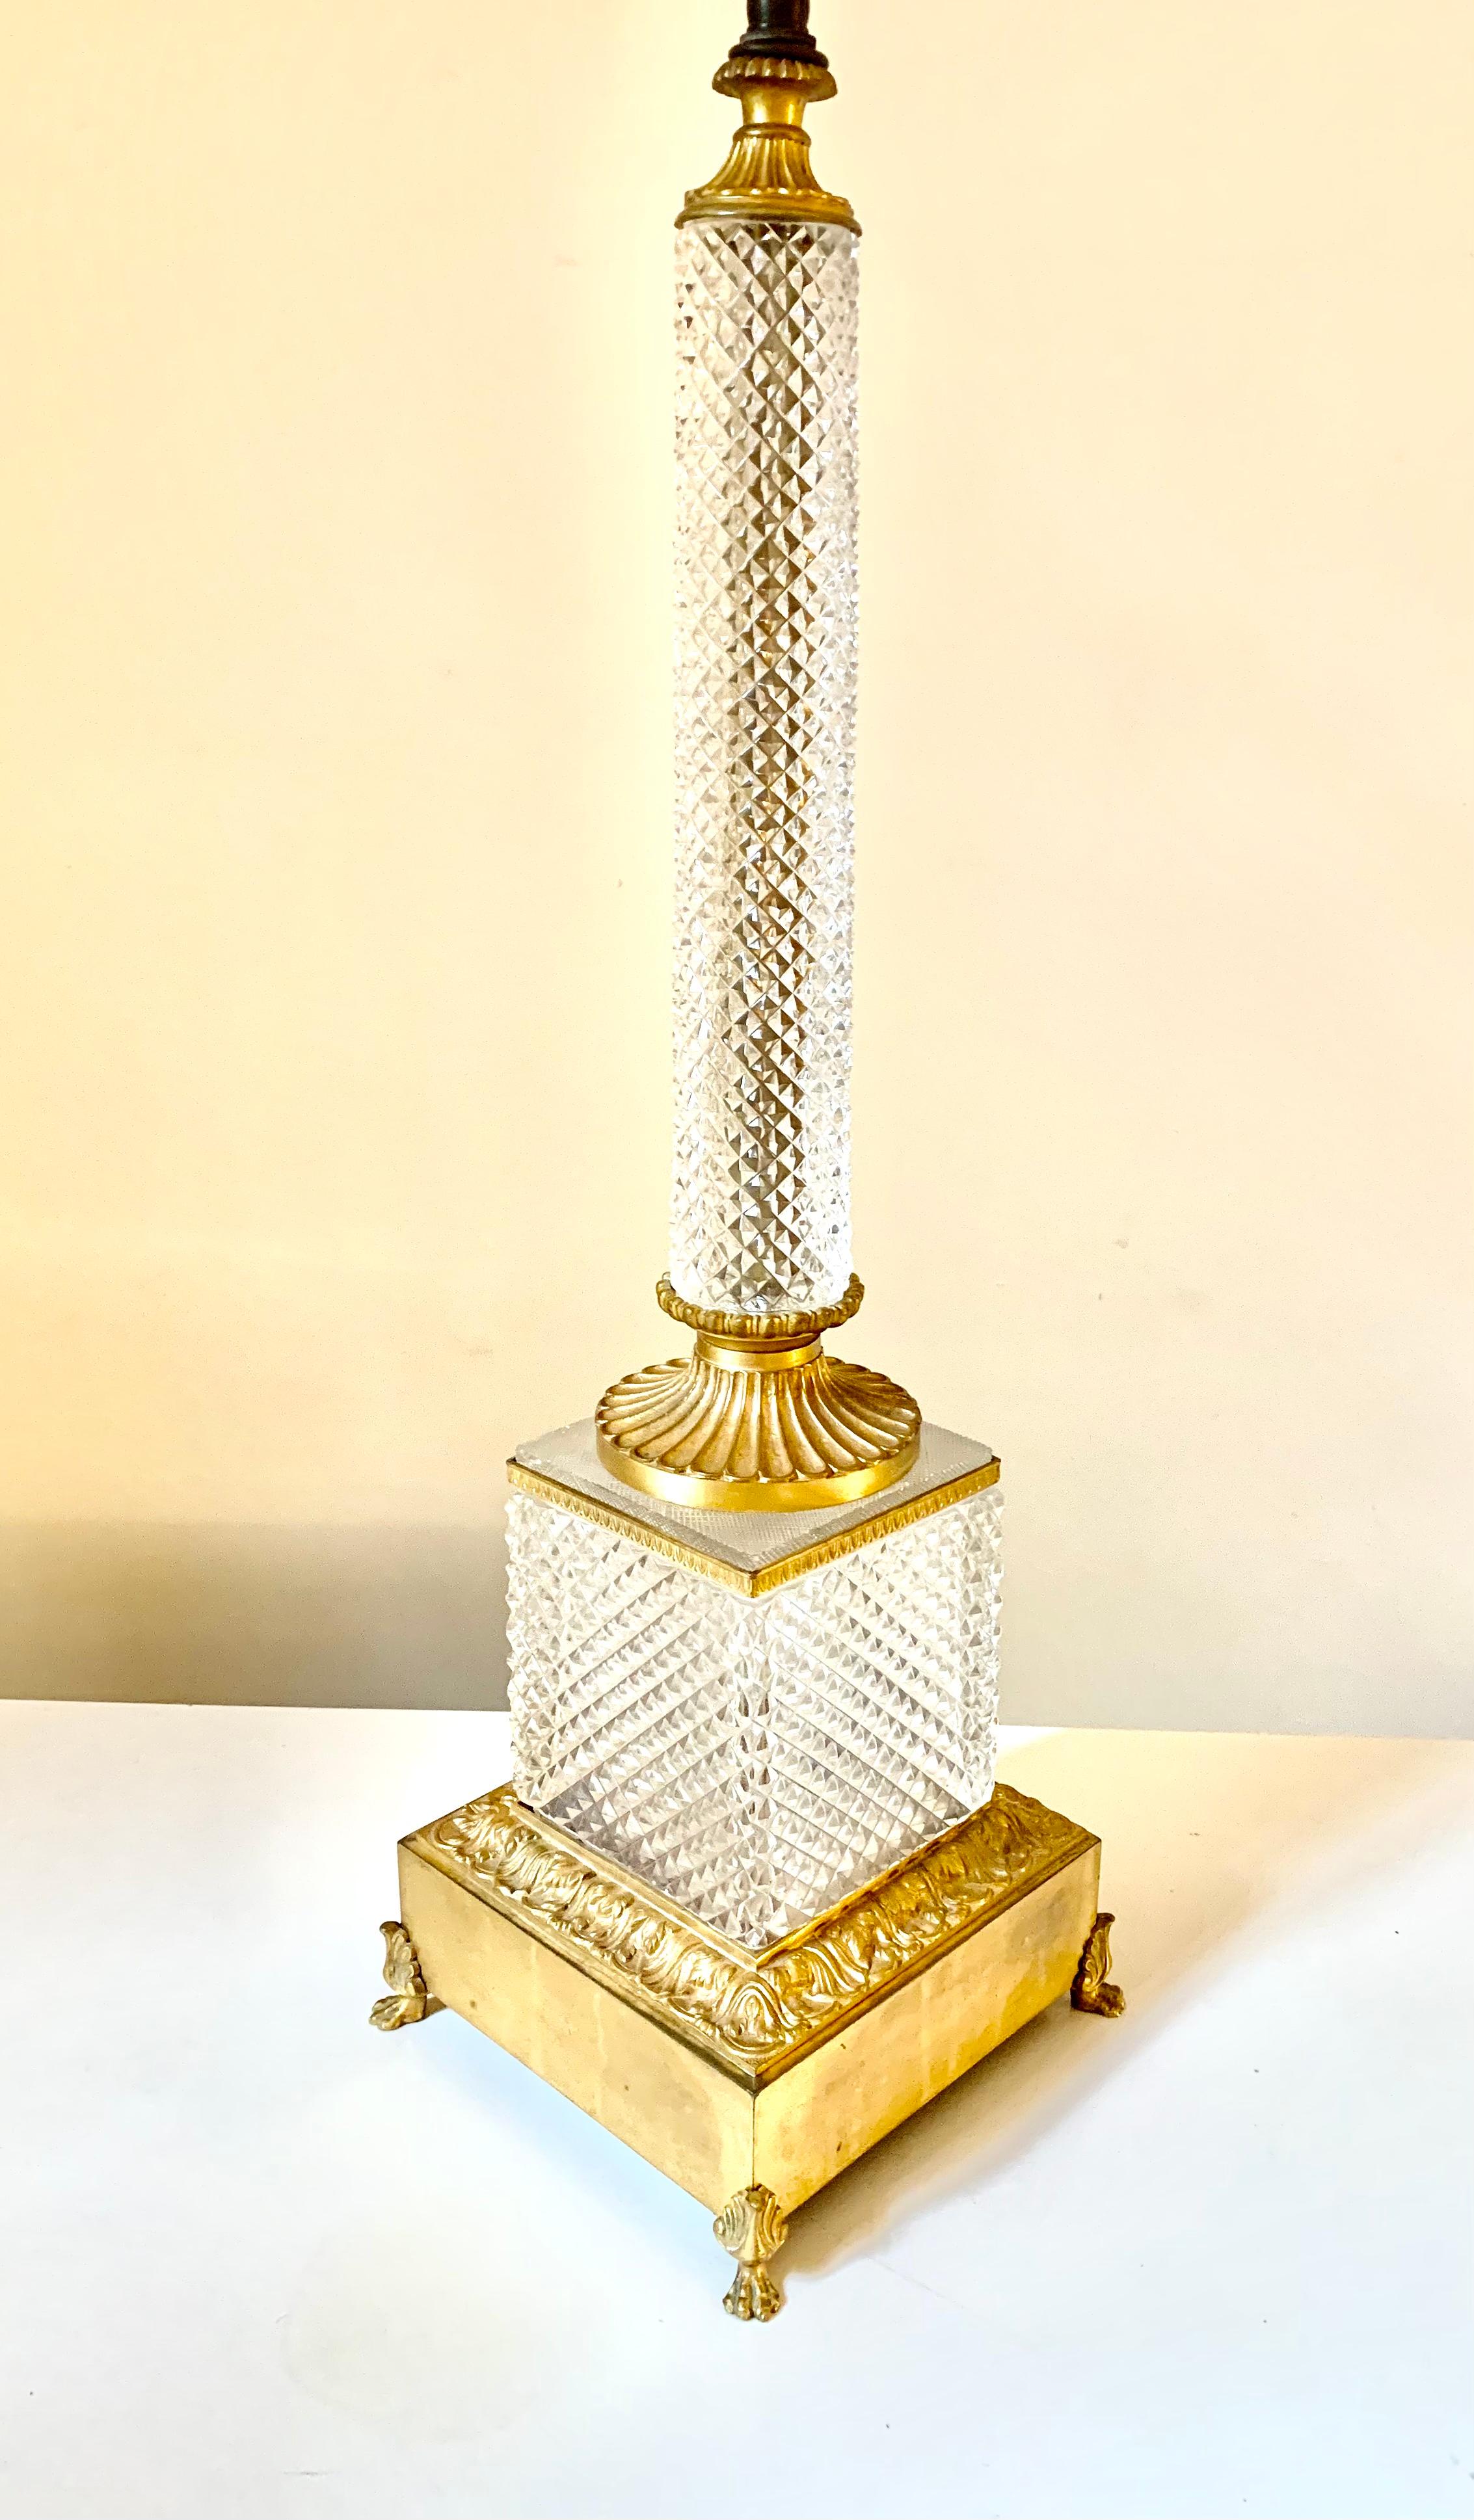 Impressive, oversize, Baccarat quality diamond cut crystal and gilt bronze Neoclassical style table lamp.
19th Century
France
Circular diamond cut crystal column with finely fluted gilt bronze capitol and base on an exquisite, minutely detailed